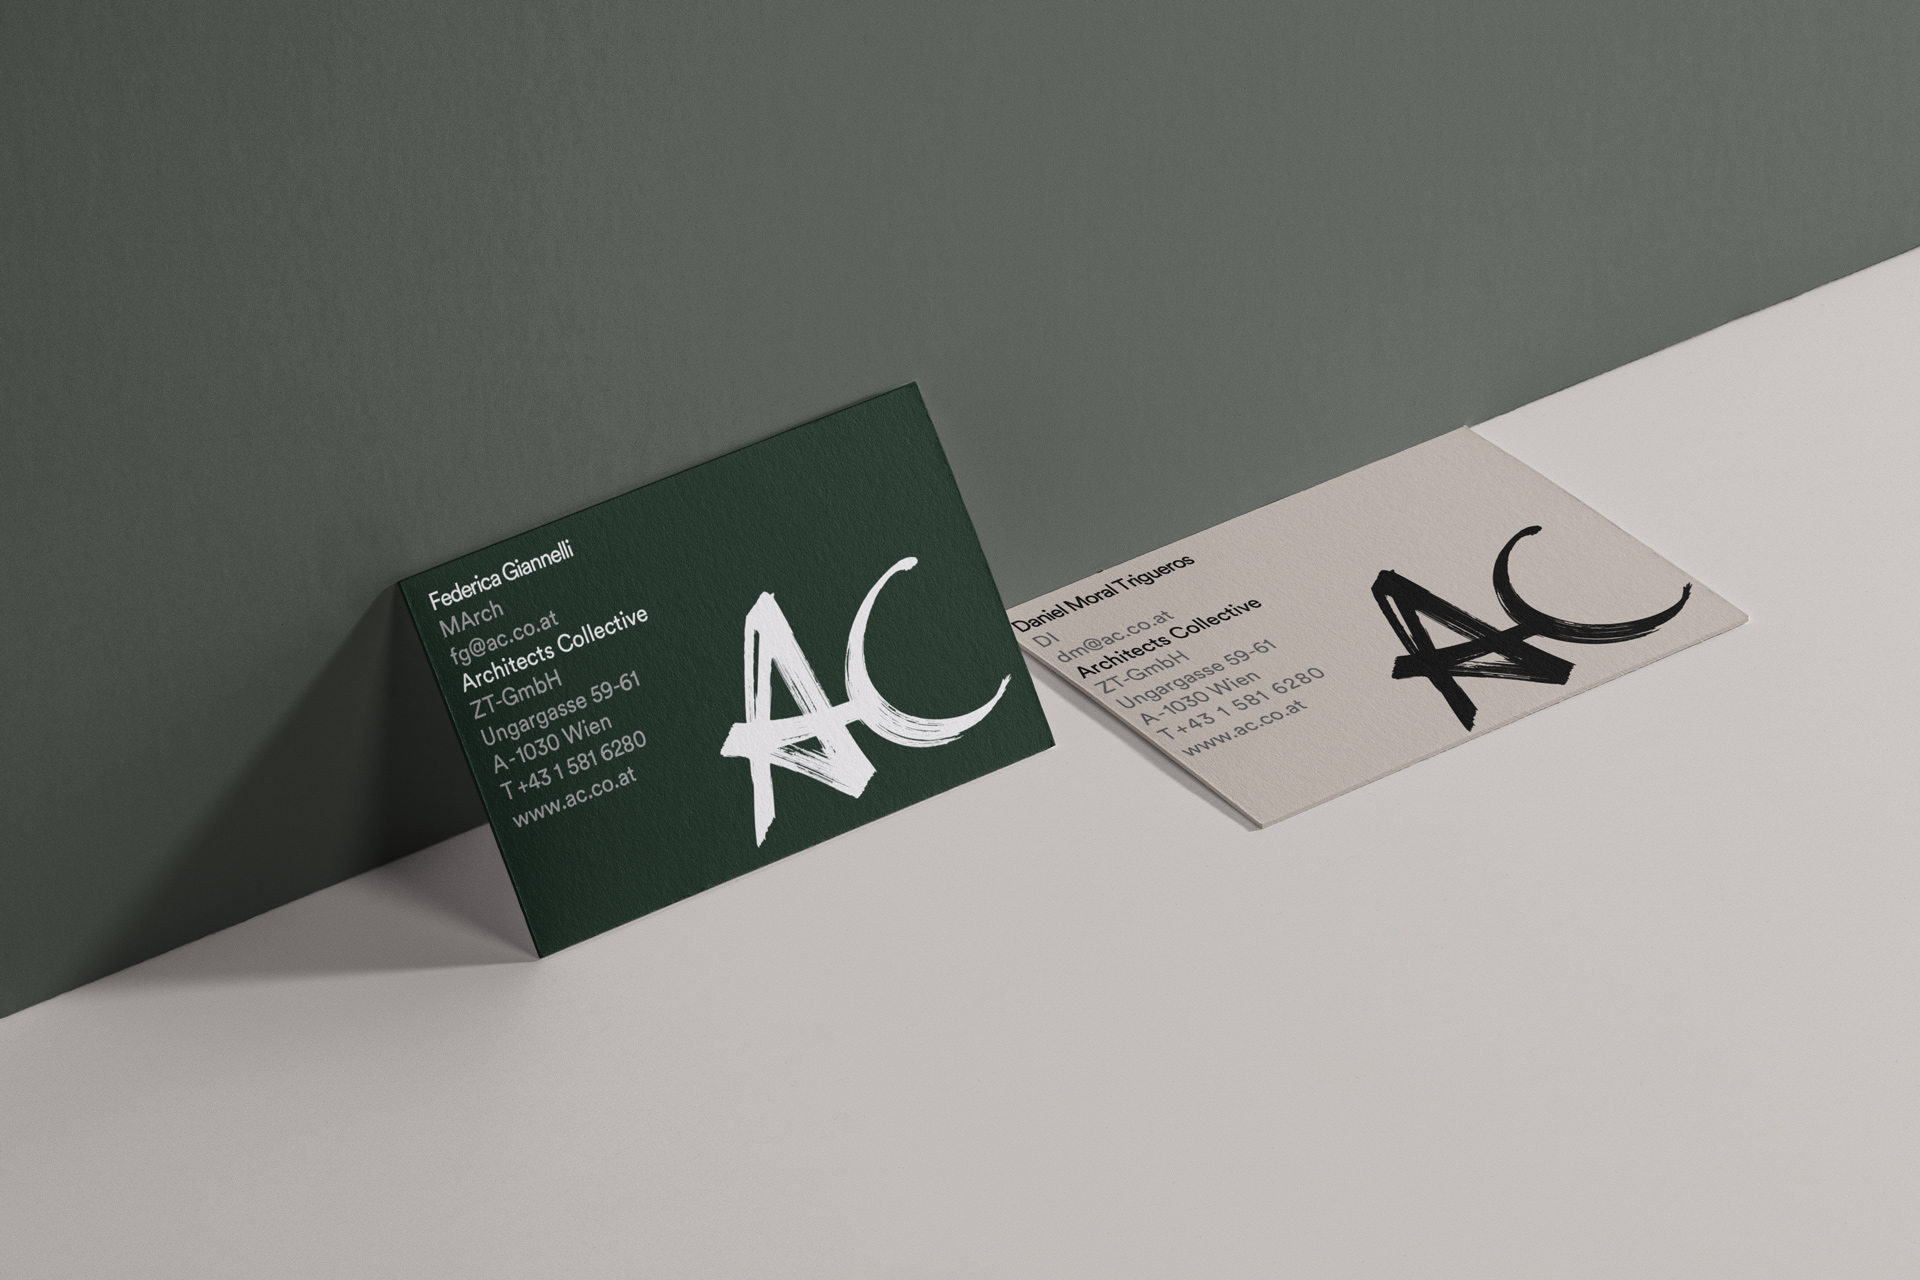 Petrol gray business cards with handwritten logo and address, front and back are in different colors